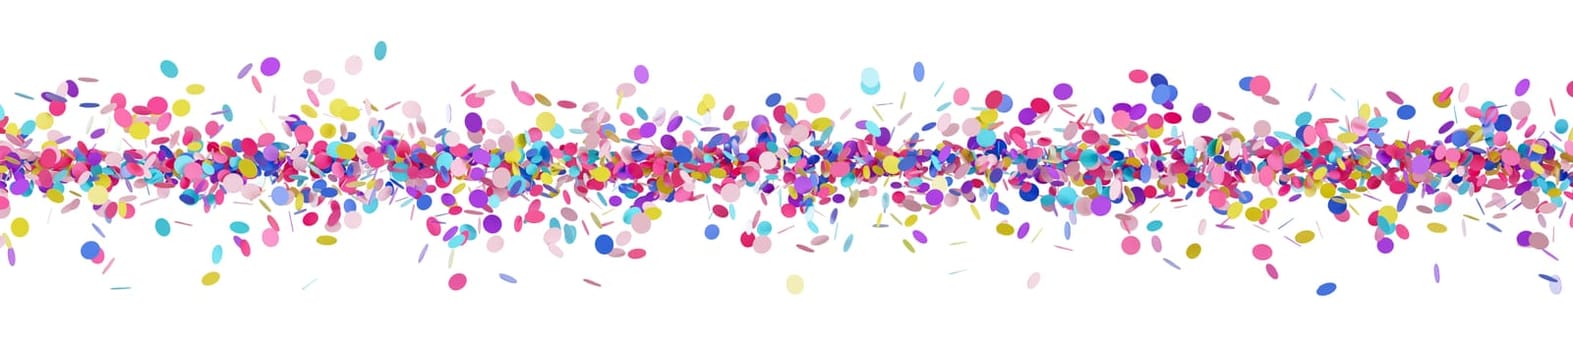 Colorful confetti line isolated on white background. Multicolor, vibrant foreground. Border. Particles row. Cut out graphic design elements. Happy birthday, party decoration. 3D render